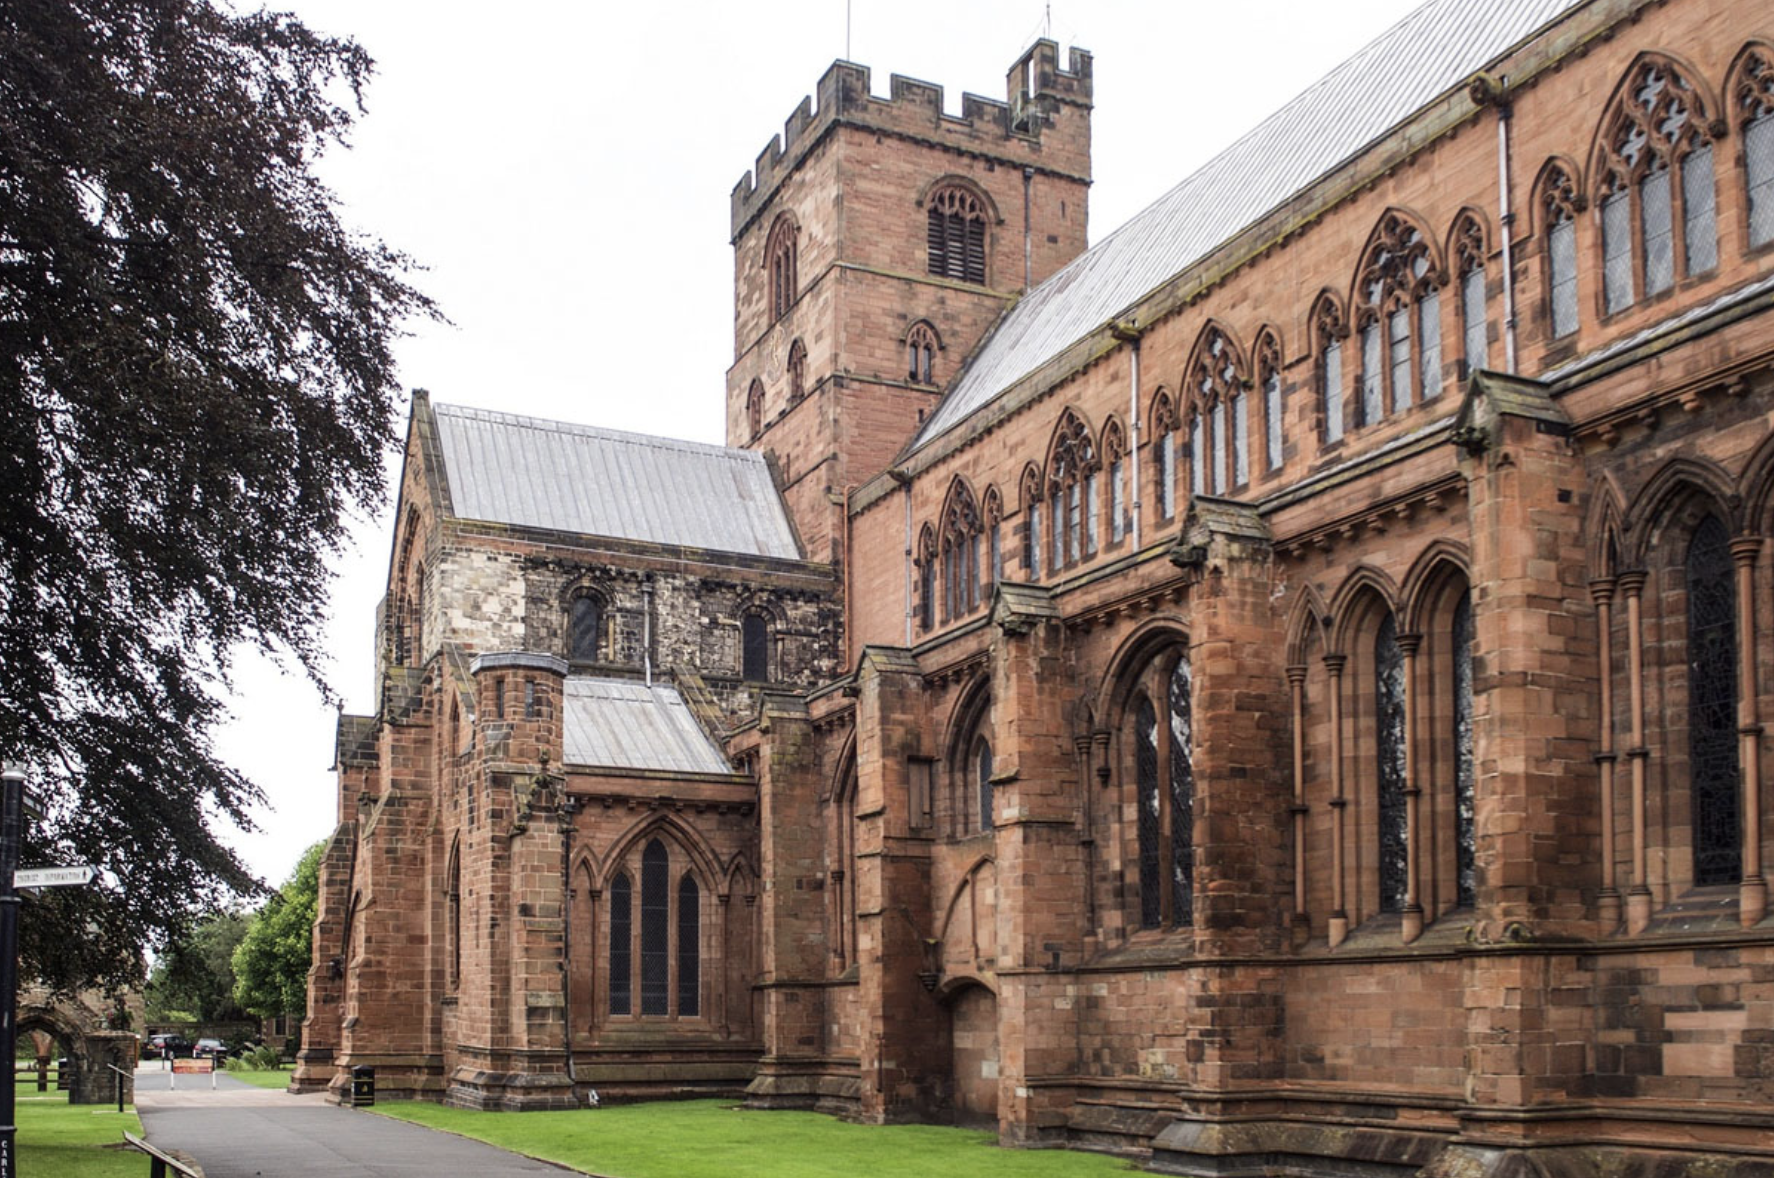 Looking down at one side of Carlisle Cathedral.